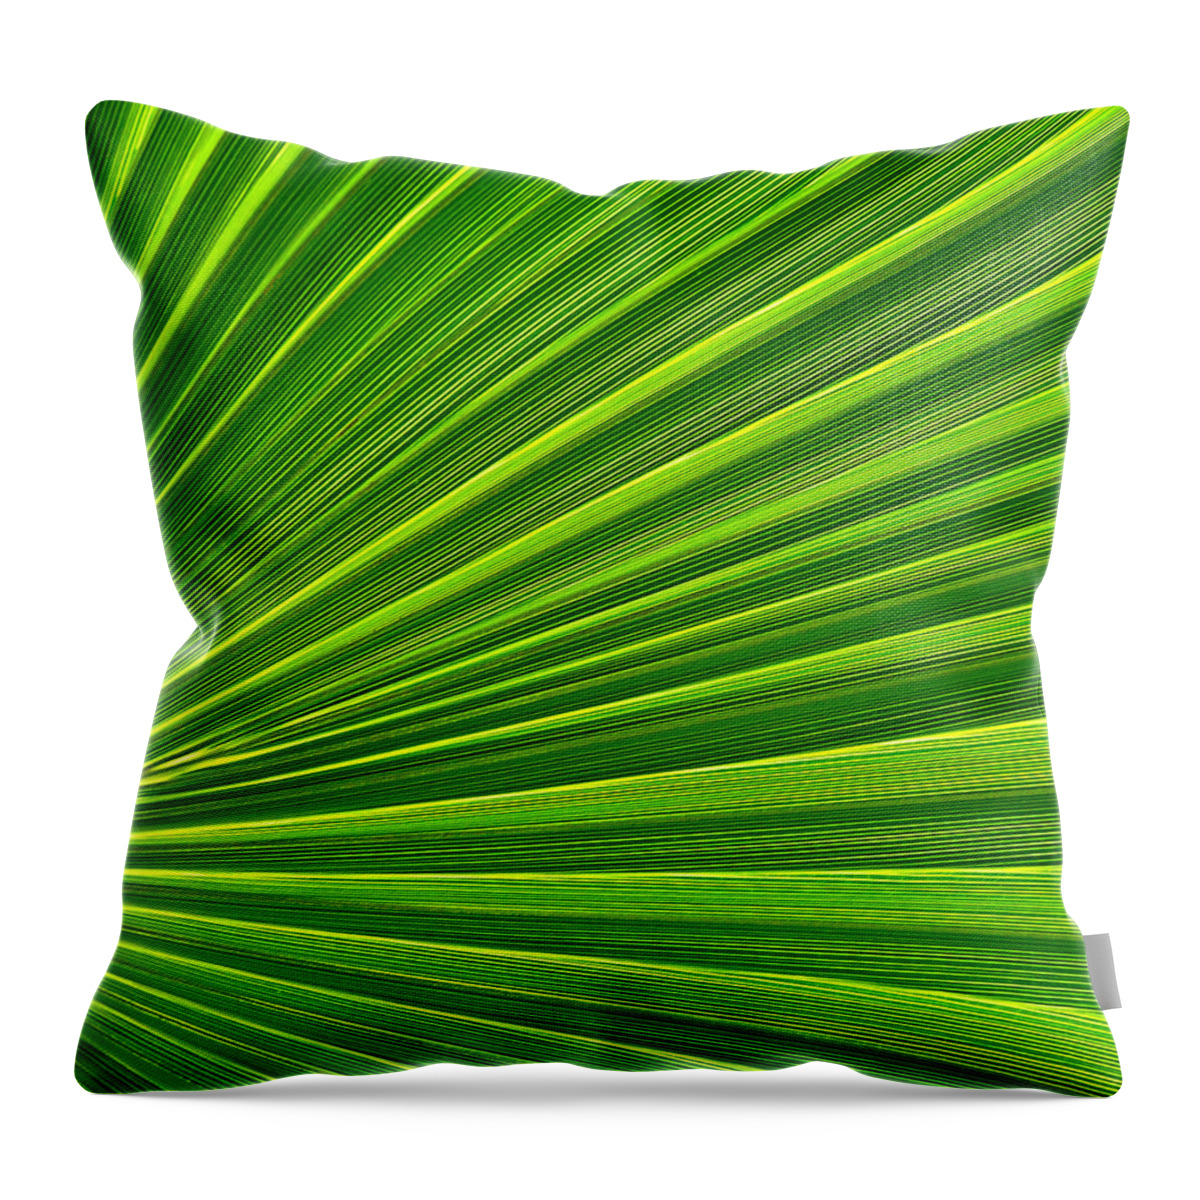 Abstract Art Throw Pillow featuring the photograph Green Perspective by Steven Huszar